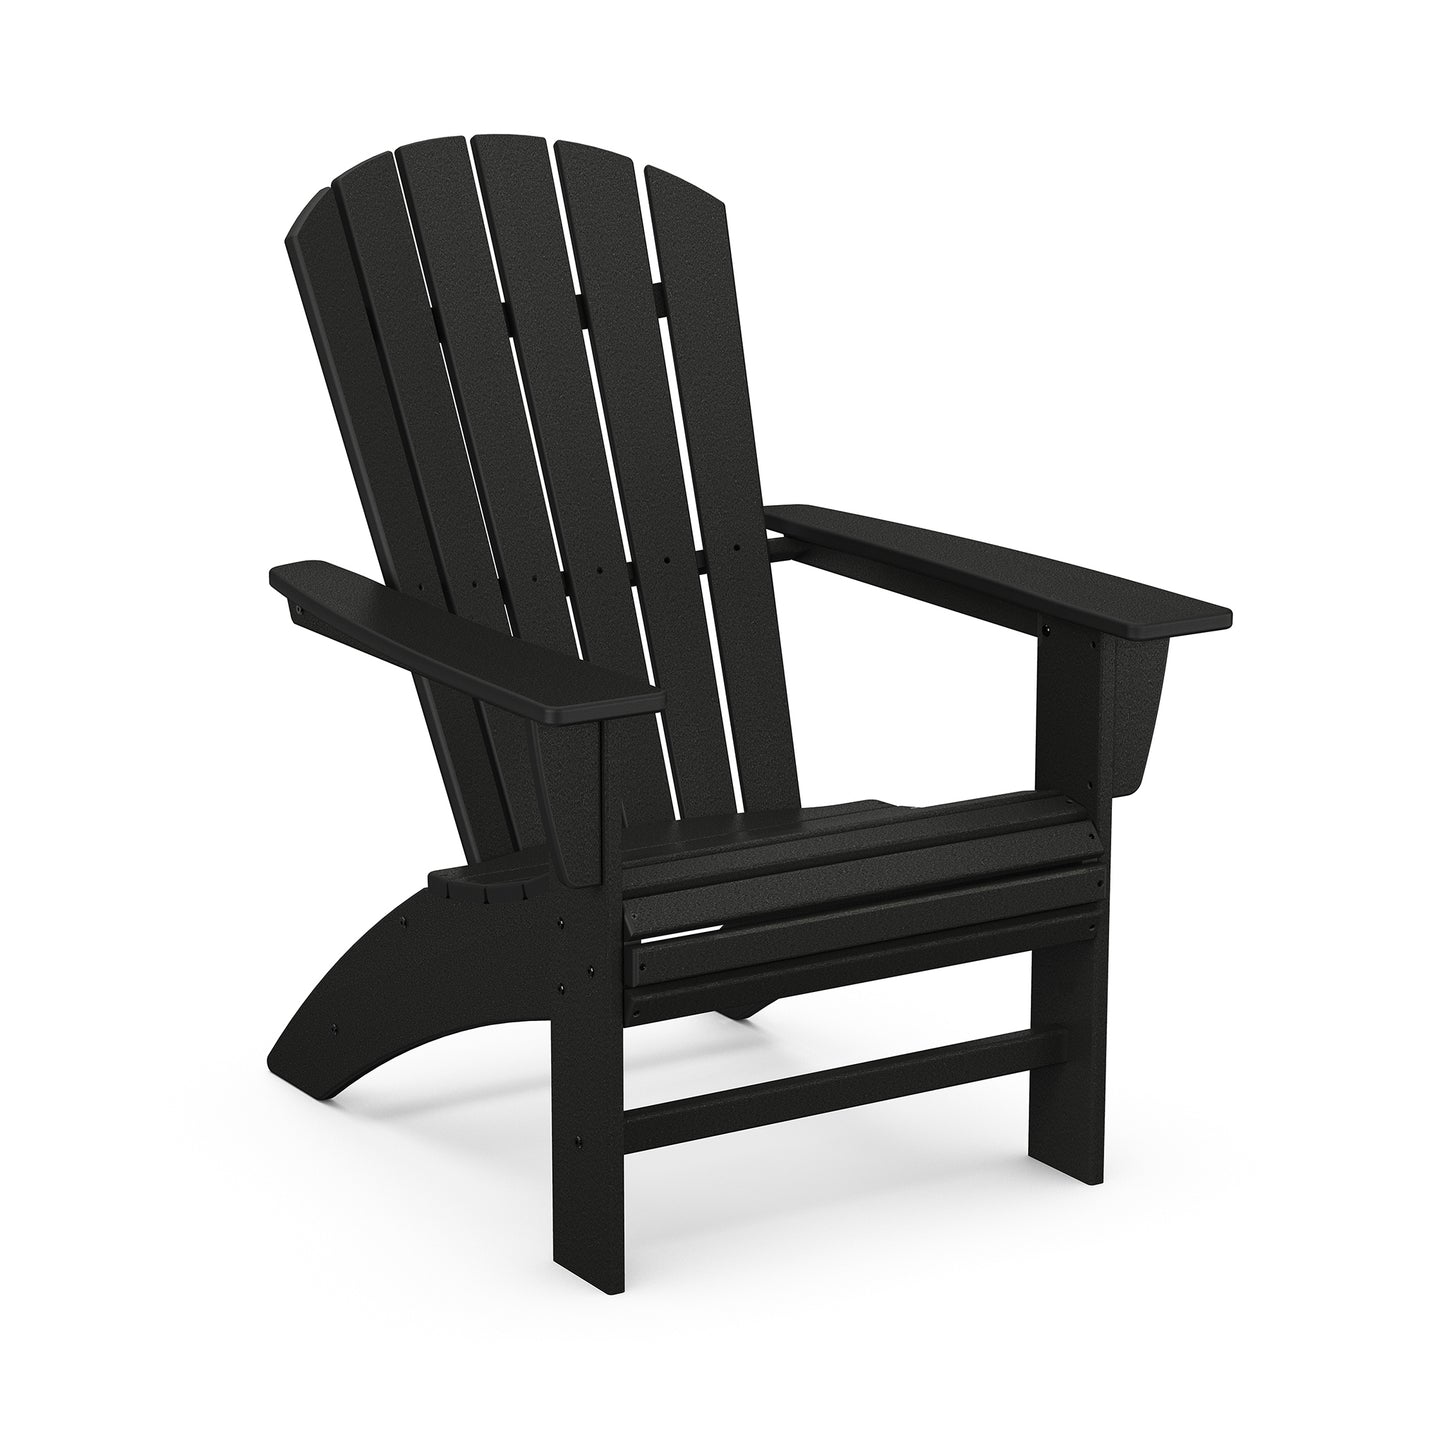 A black eco-friendly POLYWOOD Nautical Curveback Adirondack chair made of POLYWOOD® lumber, featuring a slatted back and seat with wide armrests, displayed against a plain white background.